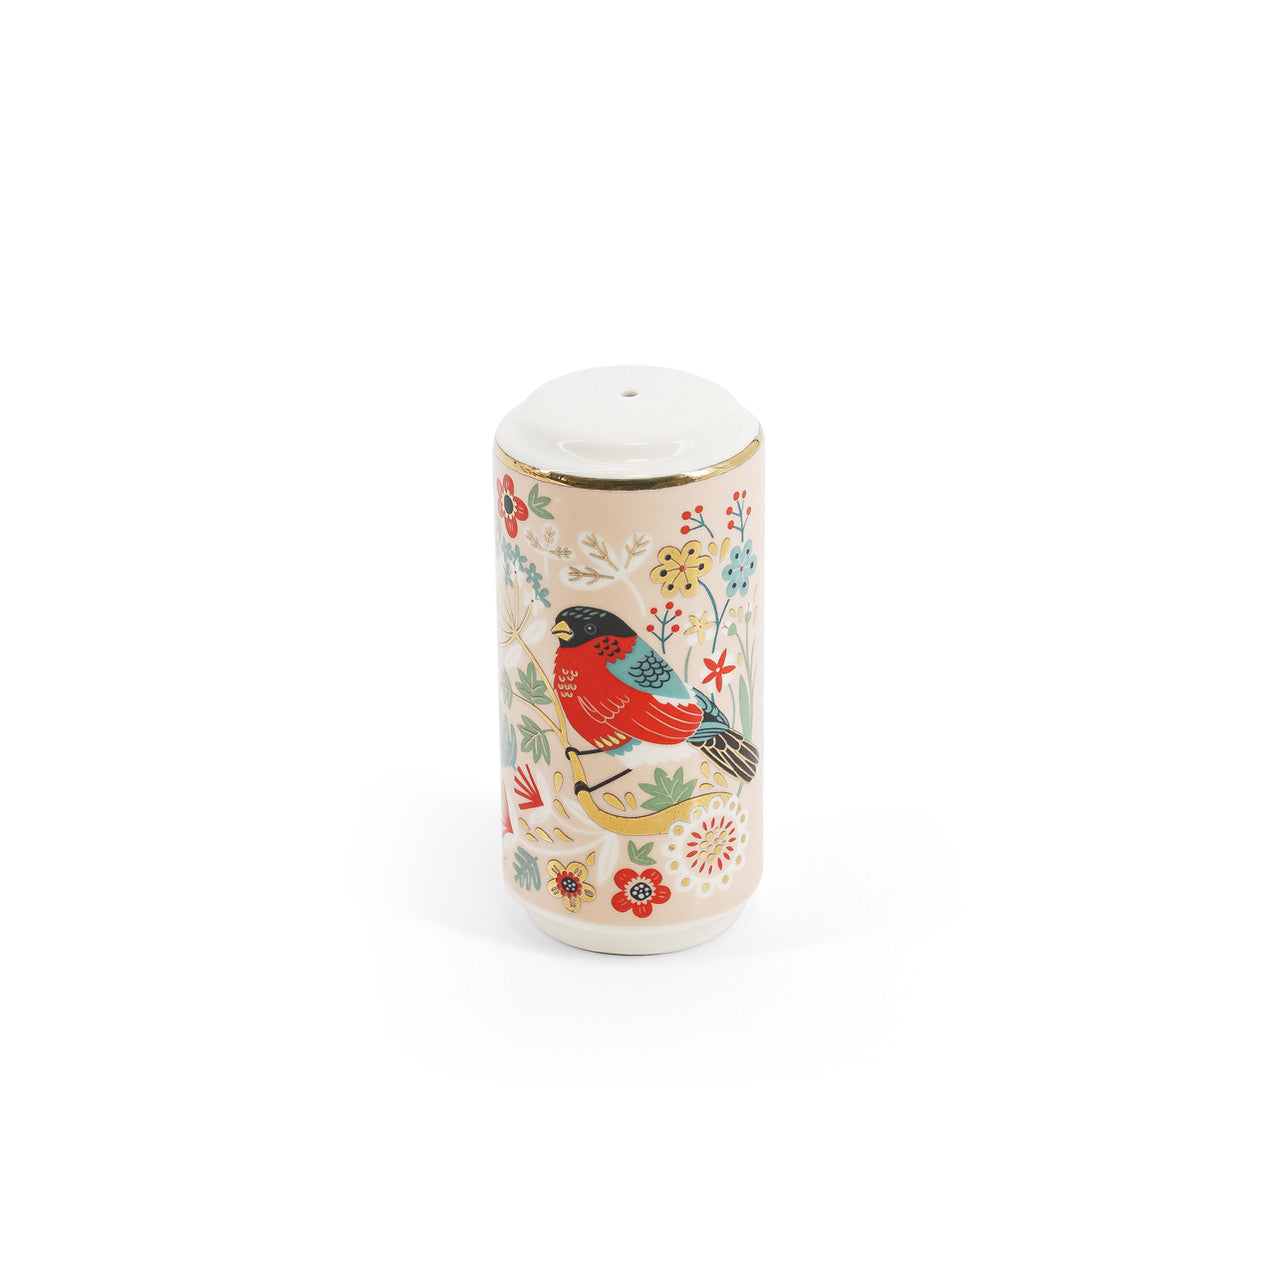 Tipperary Crystal Birdy Salt & Pepper - New 2022  The Birdy Collection is a series of 6 exclusively commissioned illustrations inspired by native Irish birds; Bullfinch, Goldfinch, Blue tit, Greenfinch, Kingfisher and Robin.